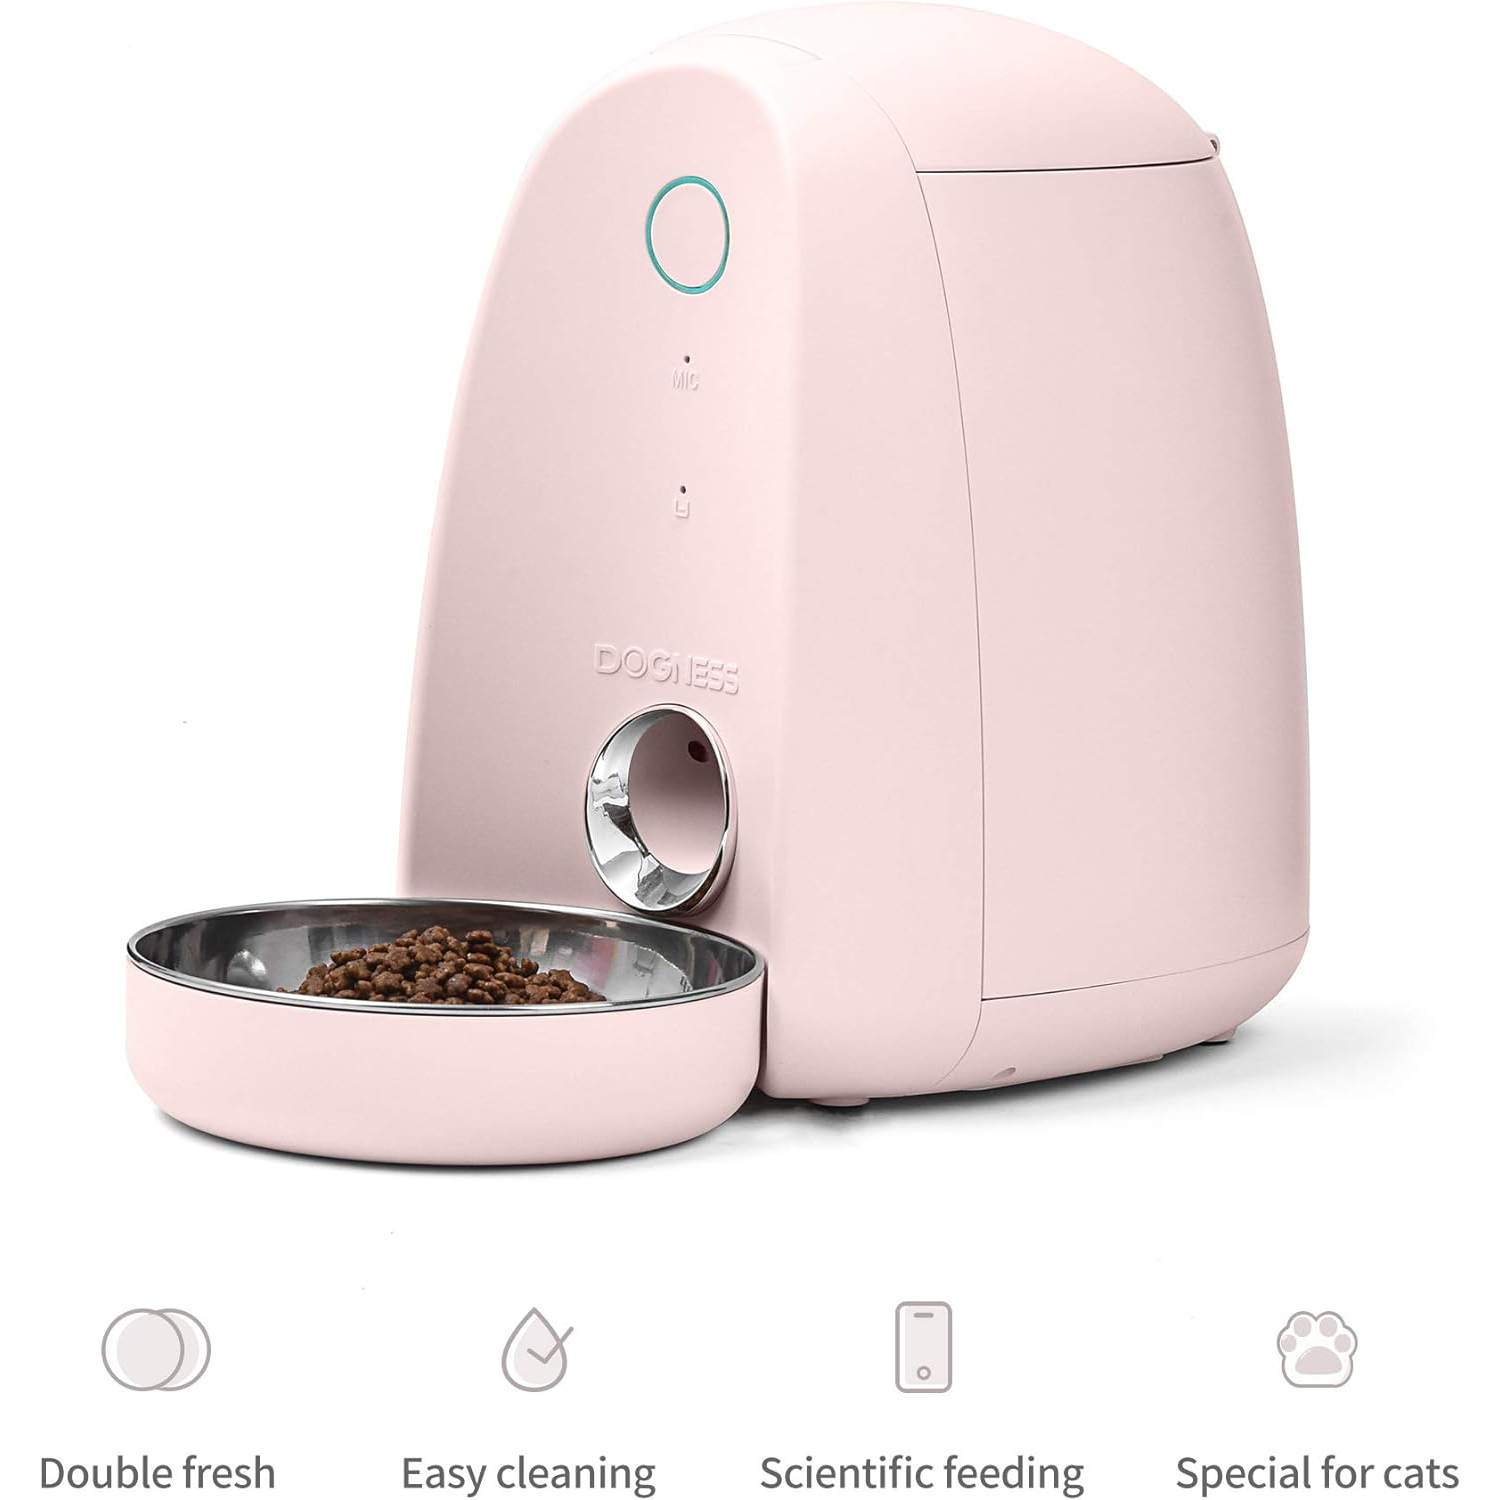 DOGNESS Automatic Cat Feeder with APP, Smart Feed WiFi Pet Feeder for Cat and Small Dog, Smartphone App Portion Control, Fresh Lock System Auto Food Dispenser(Pink) new